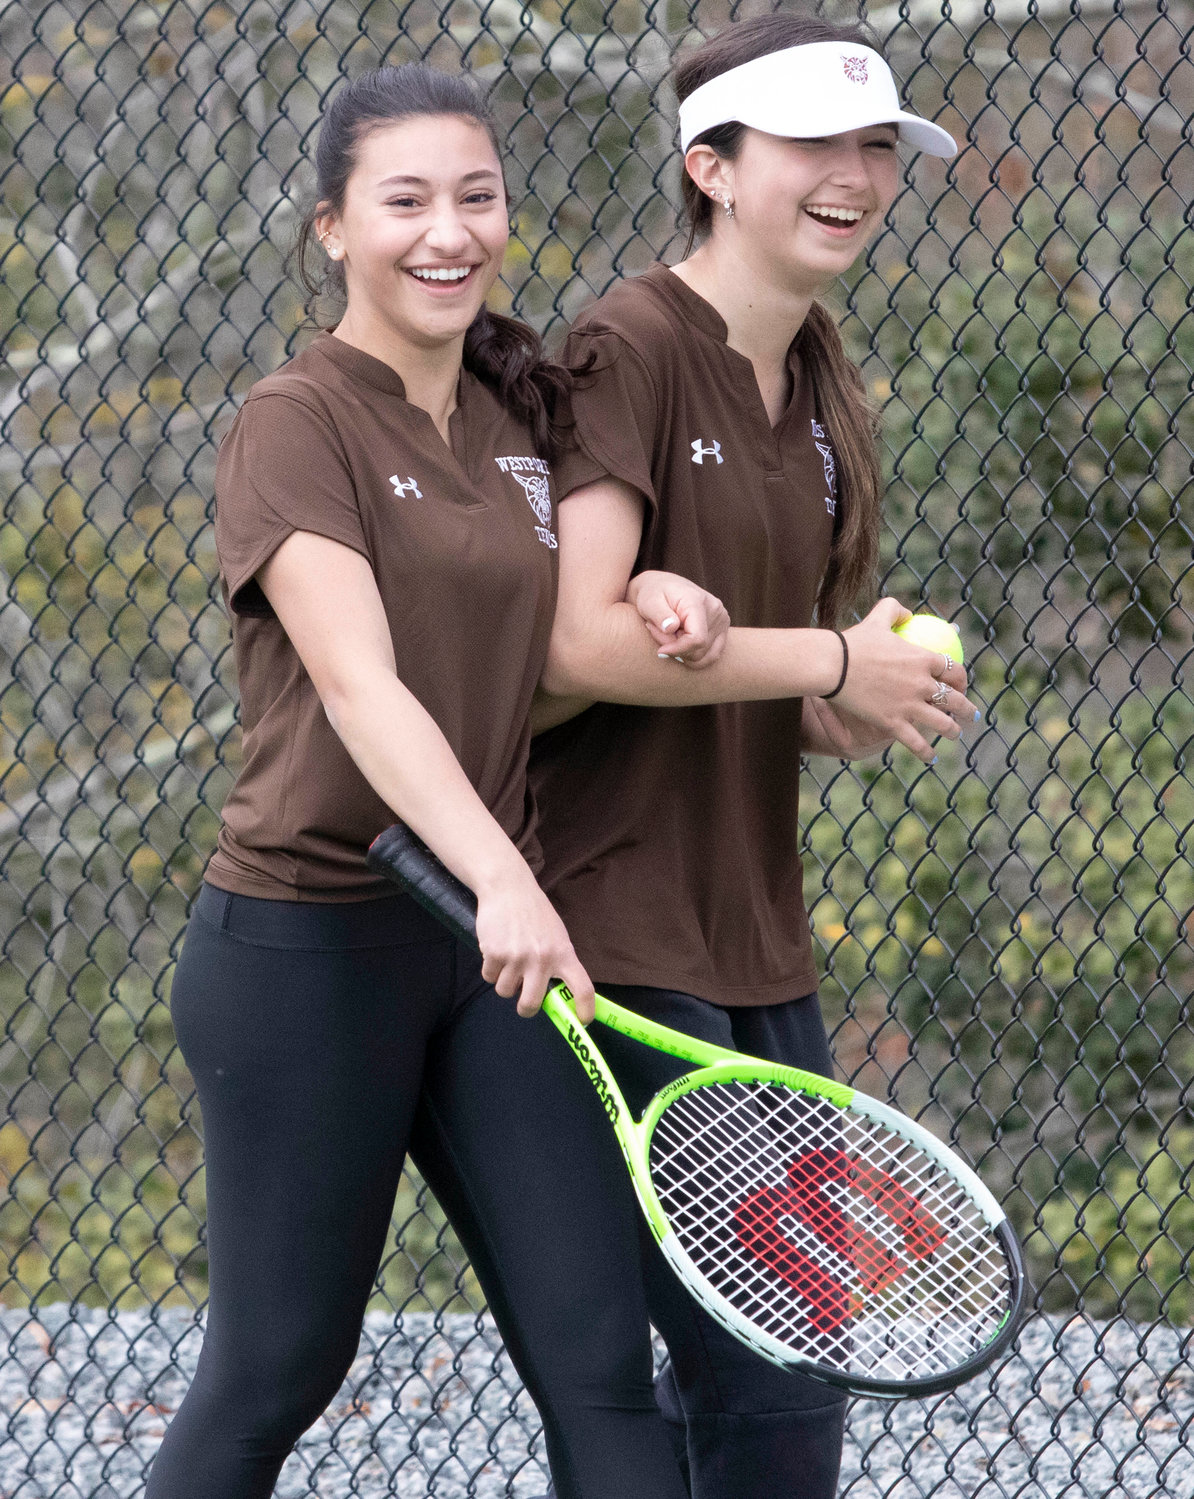 Second doubles team Avery Carvalho (left) and Madison Plourde lost their match to Diman’s Olivia DeMelo and Kaydence Simoes 6-1, 6-7(5-7) and 6-7(5-7). The team shared a laughed when Plourde hit Carvalho who stood at the net, with a forehand during the match.